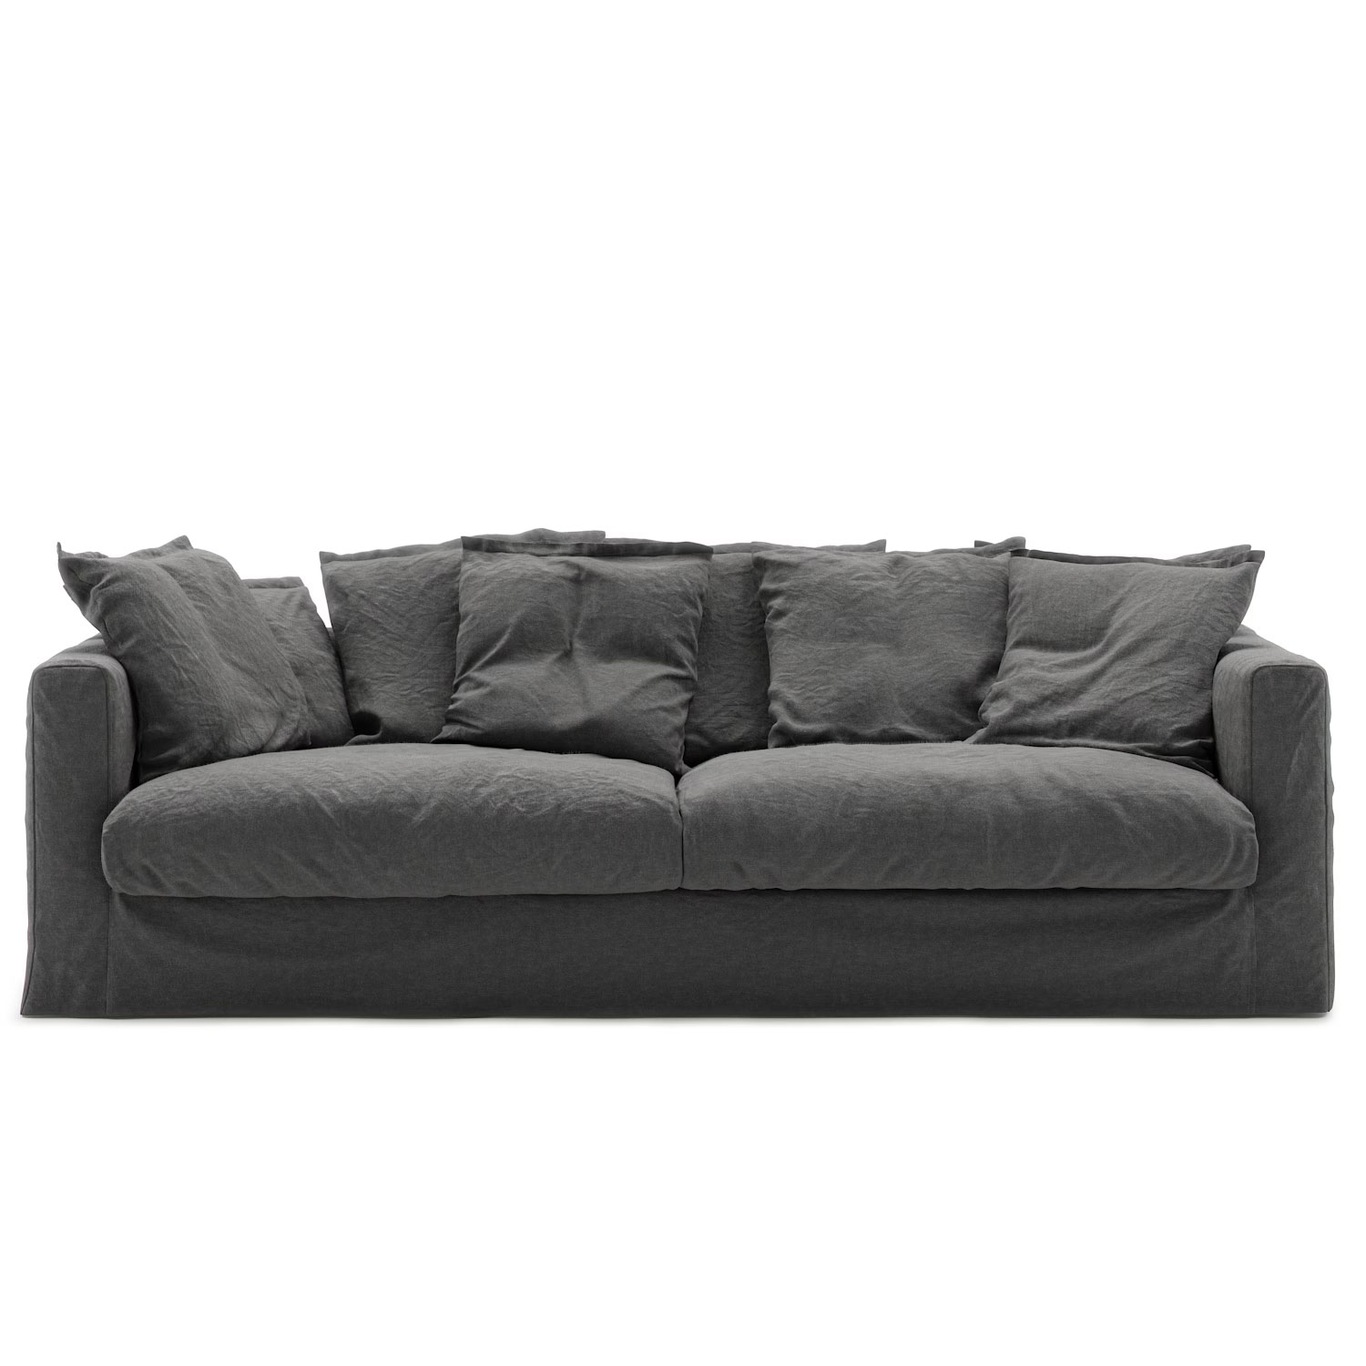 Le Grand Air Upholstery 3-Seater Linen, Carbon Dust